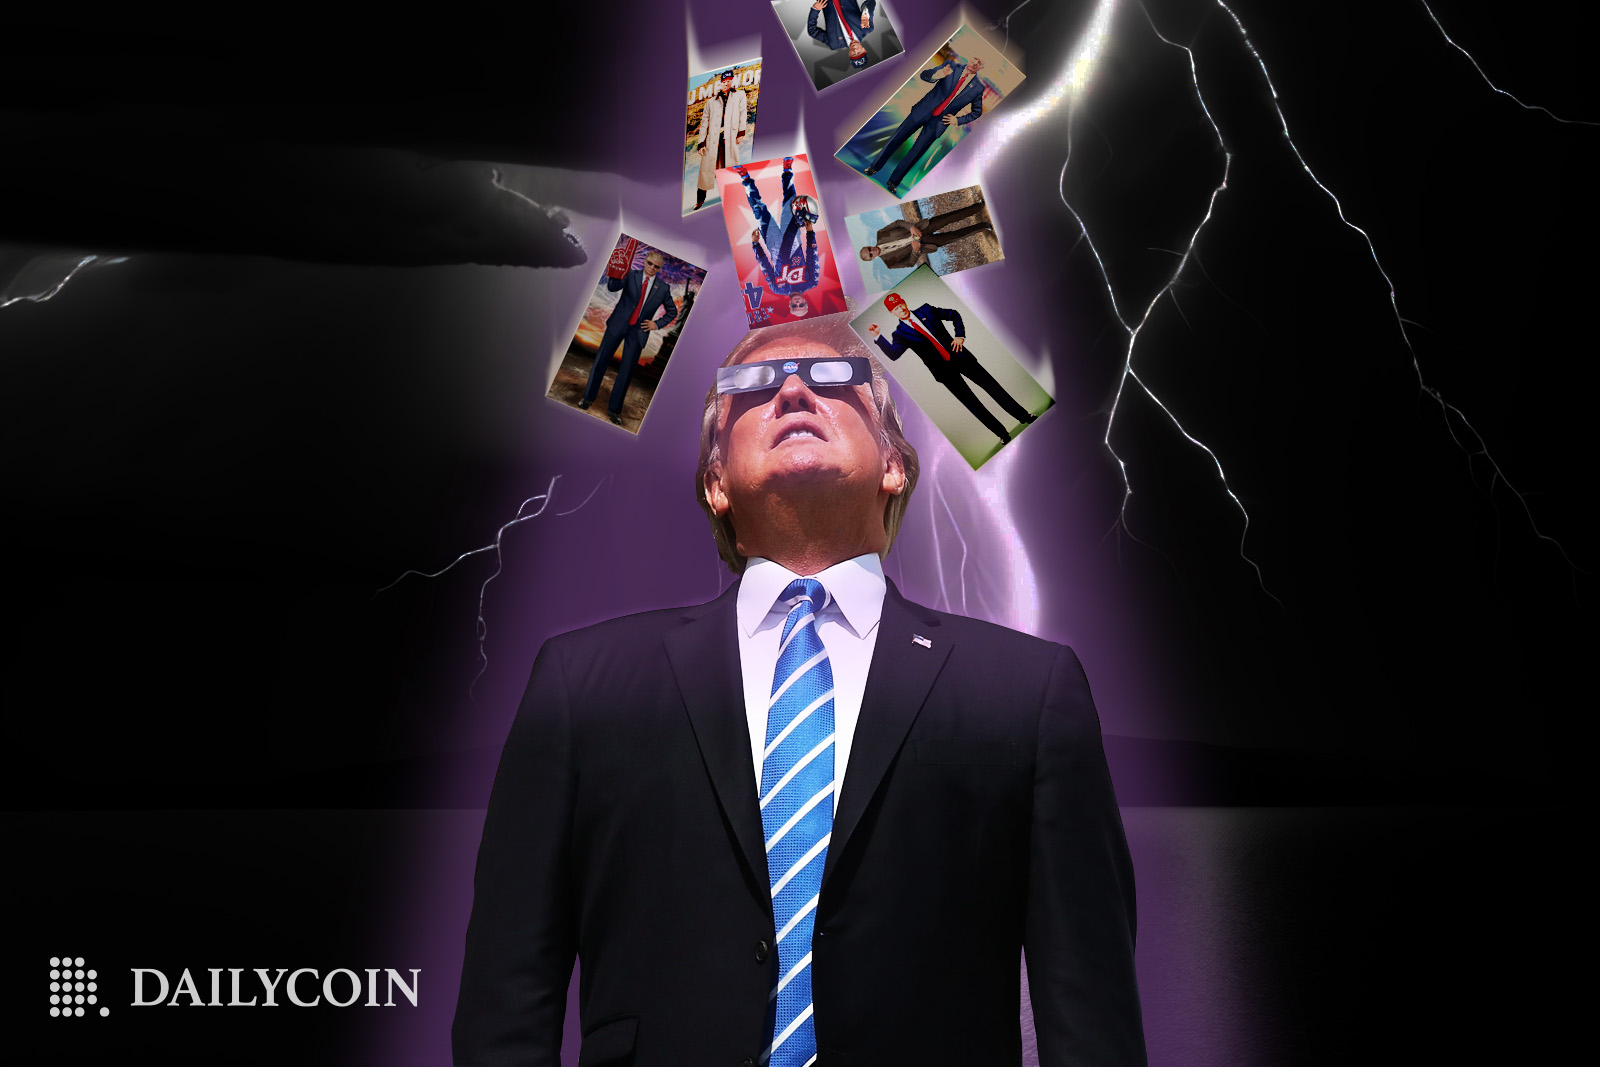 Trump Cards are falling down from the sky as former president Donald Trump looks up with cool sunglasses.